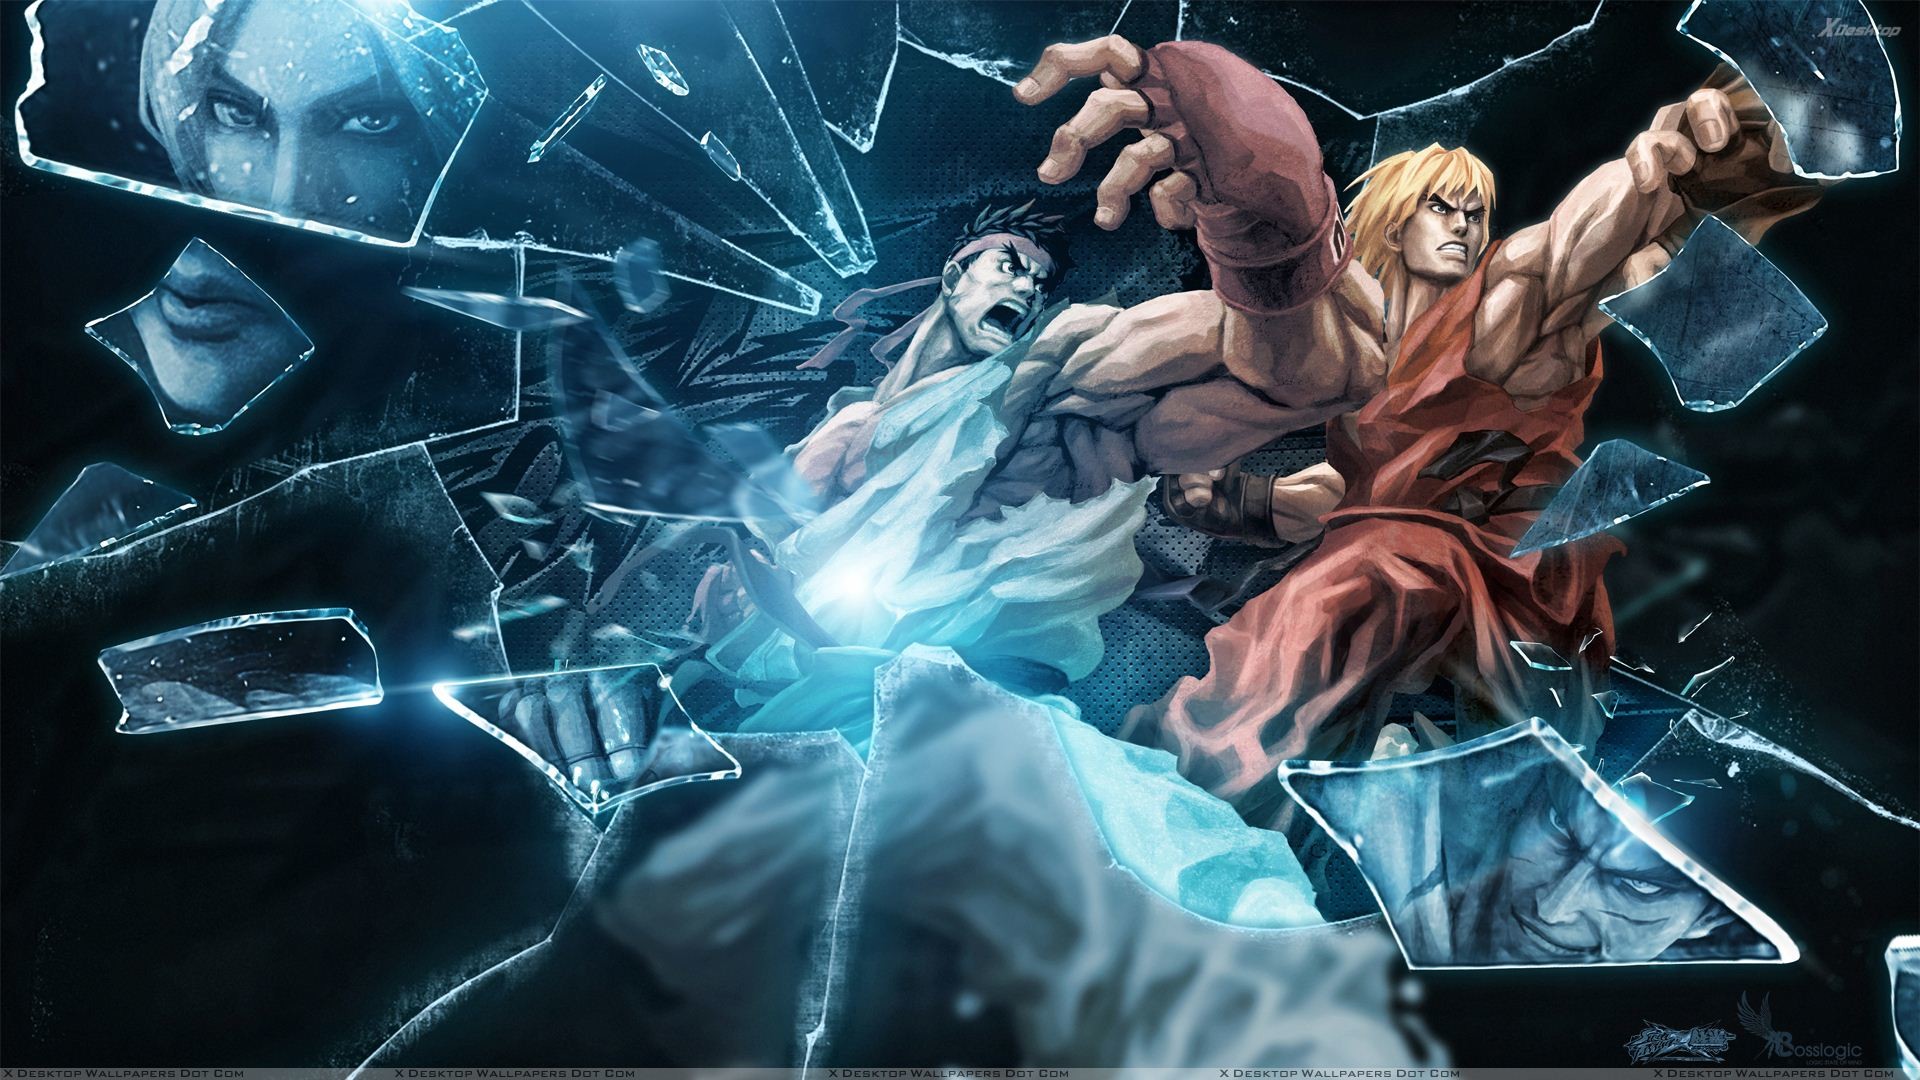 1920x1080 You are viewing wallpaper titled "Street Fighter ...